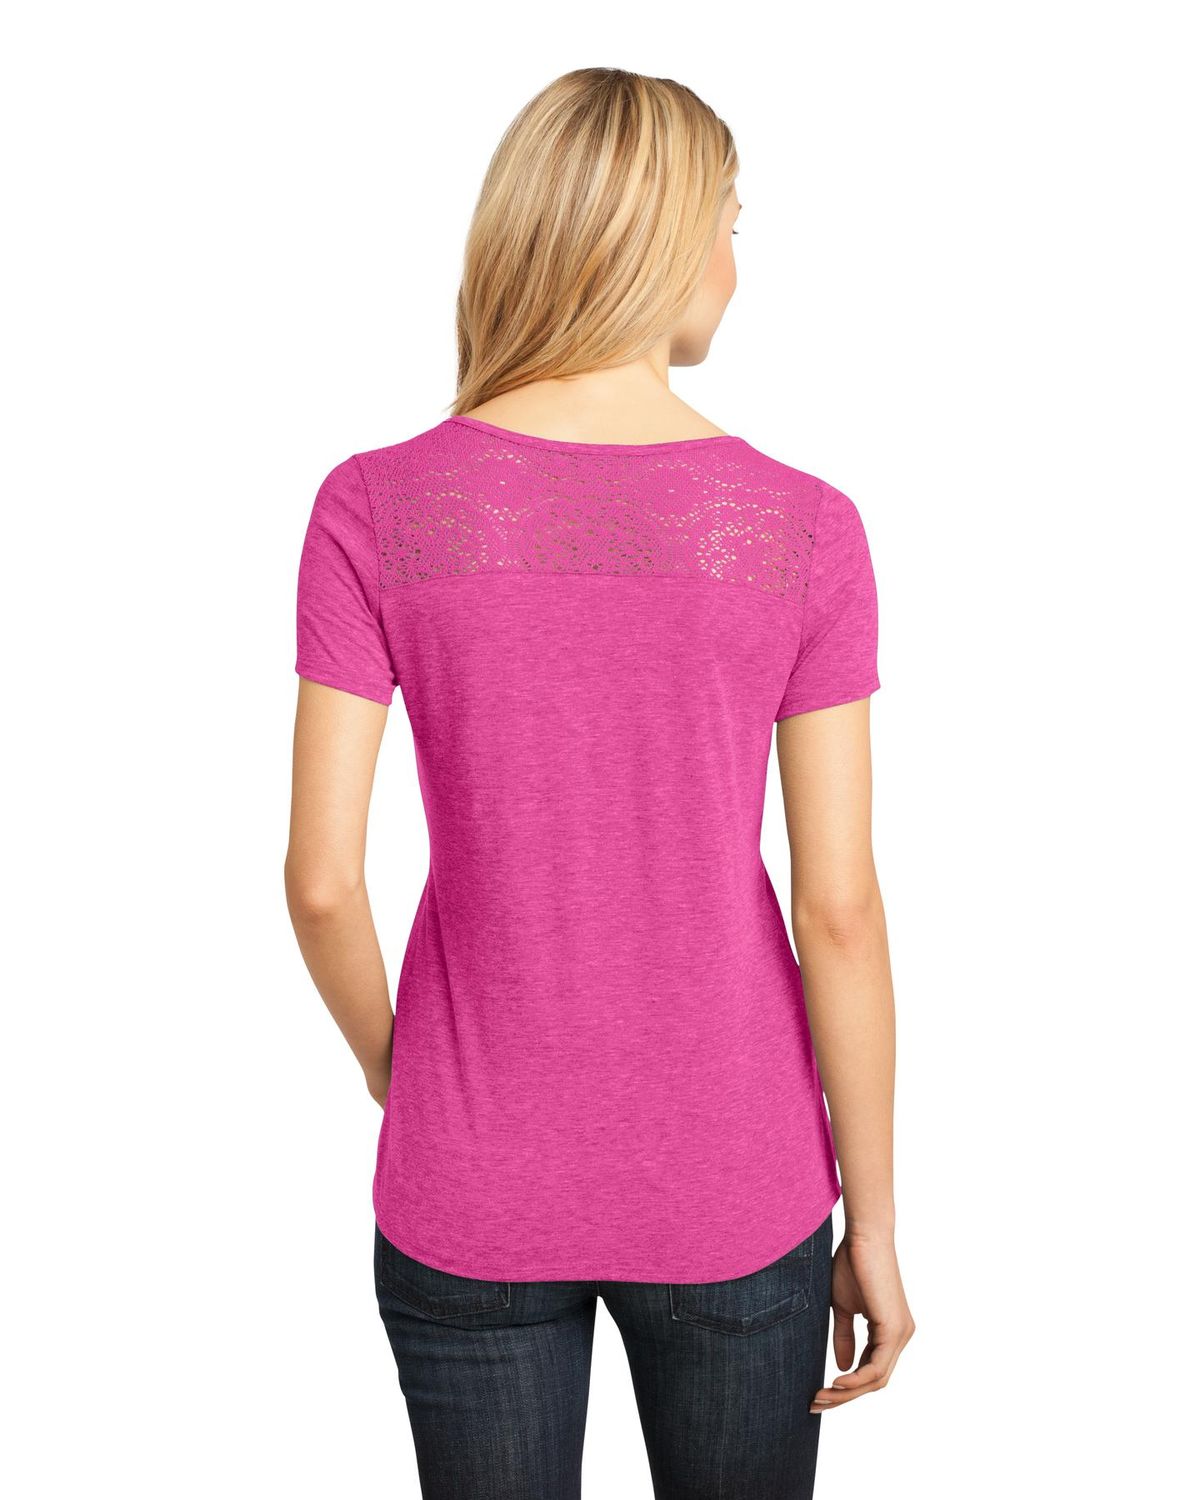 'District Made DM441 Ladies Tri Blend Lace Tee.'